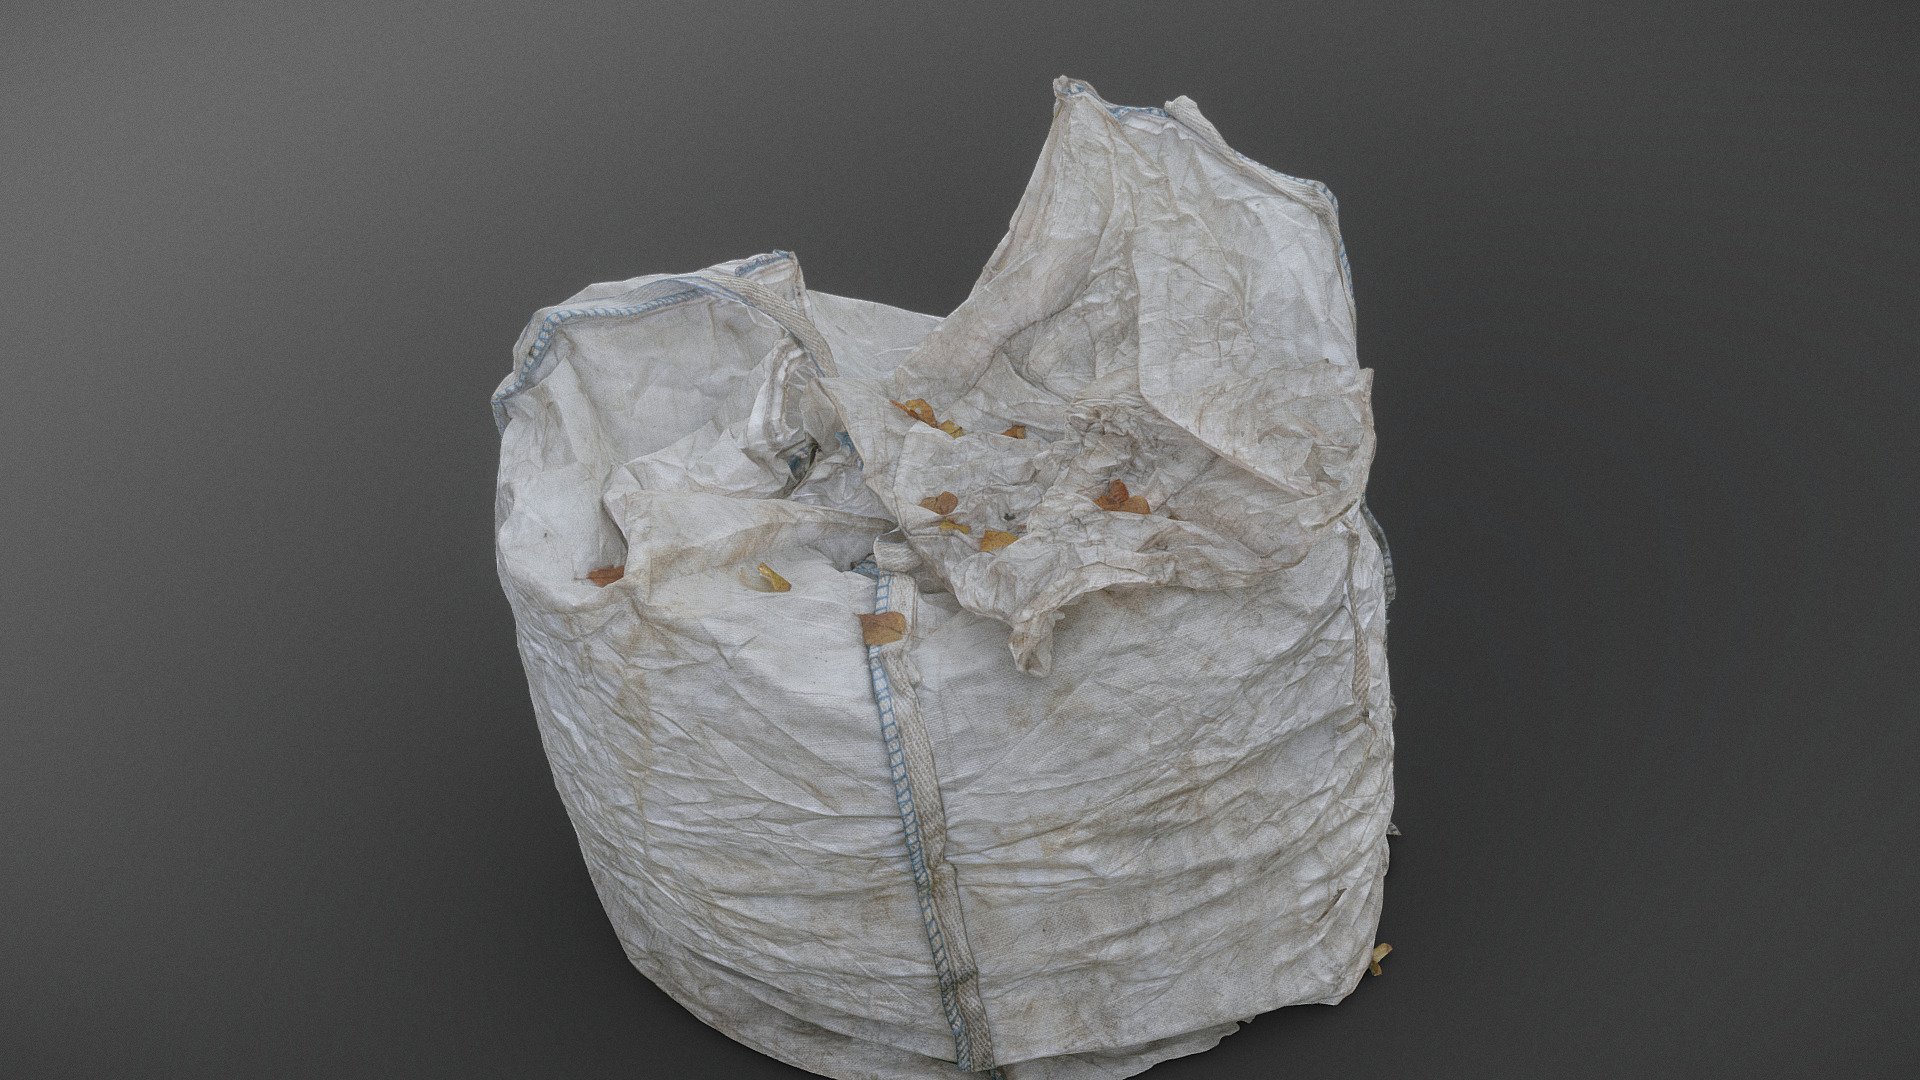 Gardening yard garbage tree leaf leaves grass lawn collection bag made of white polyacrylate cross linked plastic material

photogrammetry scan (150 x 36MP, 3x8K textures)


SketchfabWeeklyChallenge &ldquo;Garbage